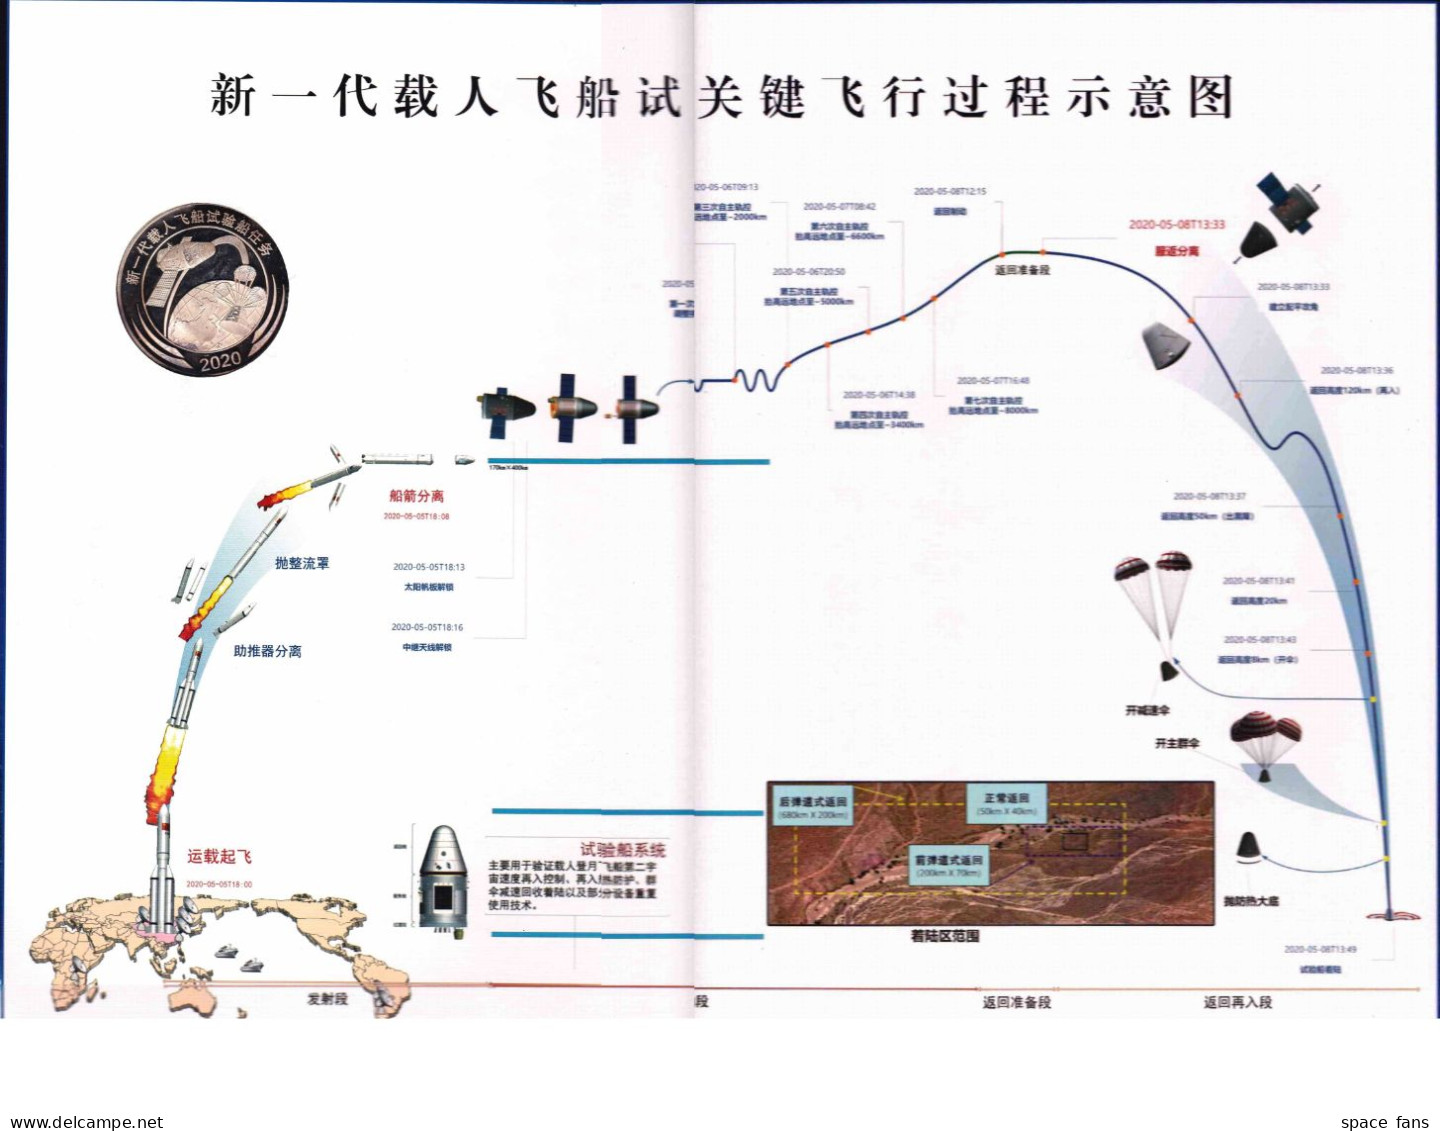 CHINA 2020 Next-Generation Crewed Spacecraft FLOWN Special Metal Medal,Really Space Flown Item With COA,177 Made - Asien